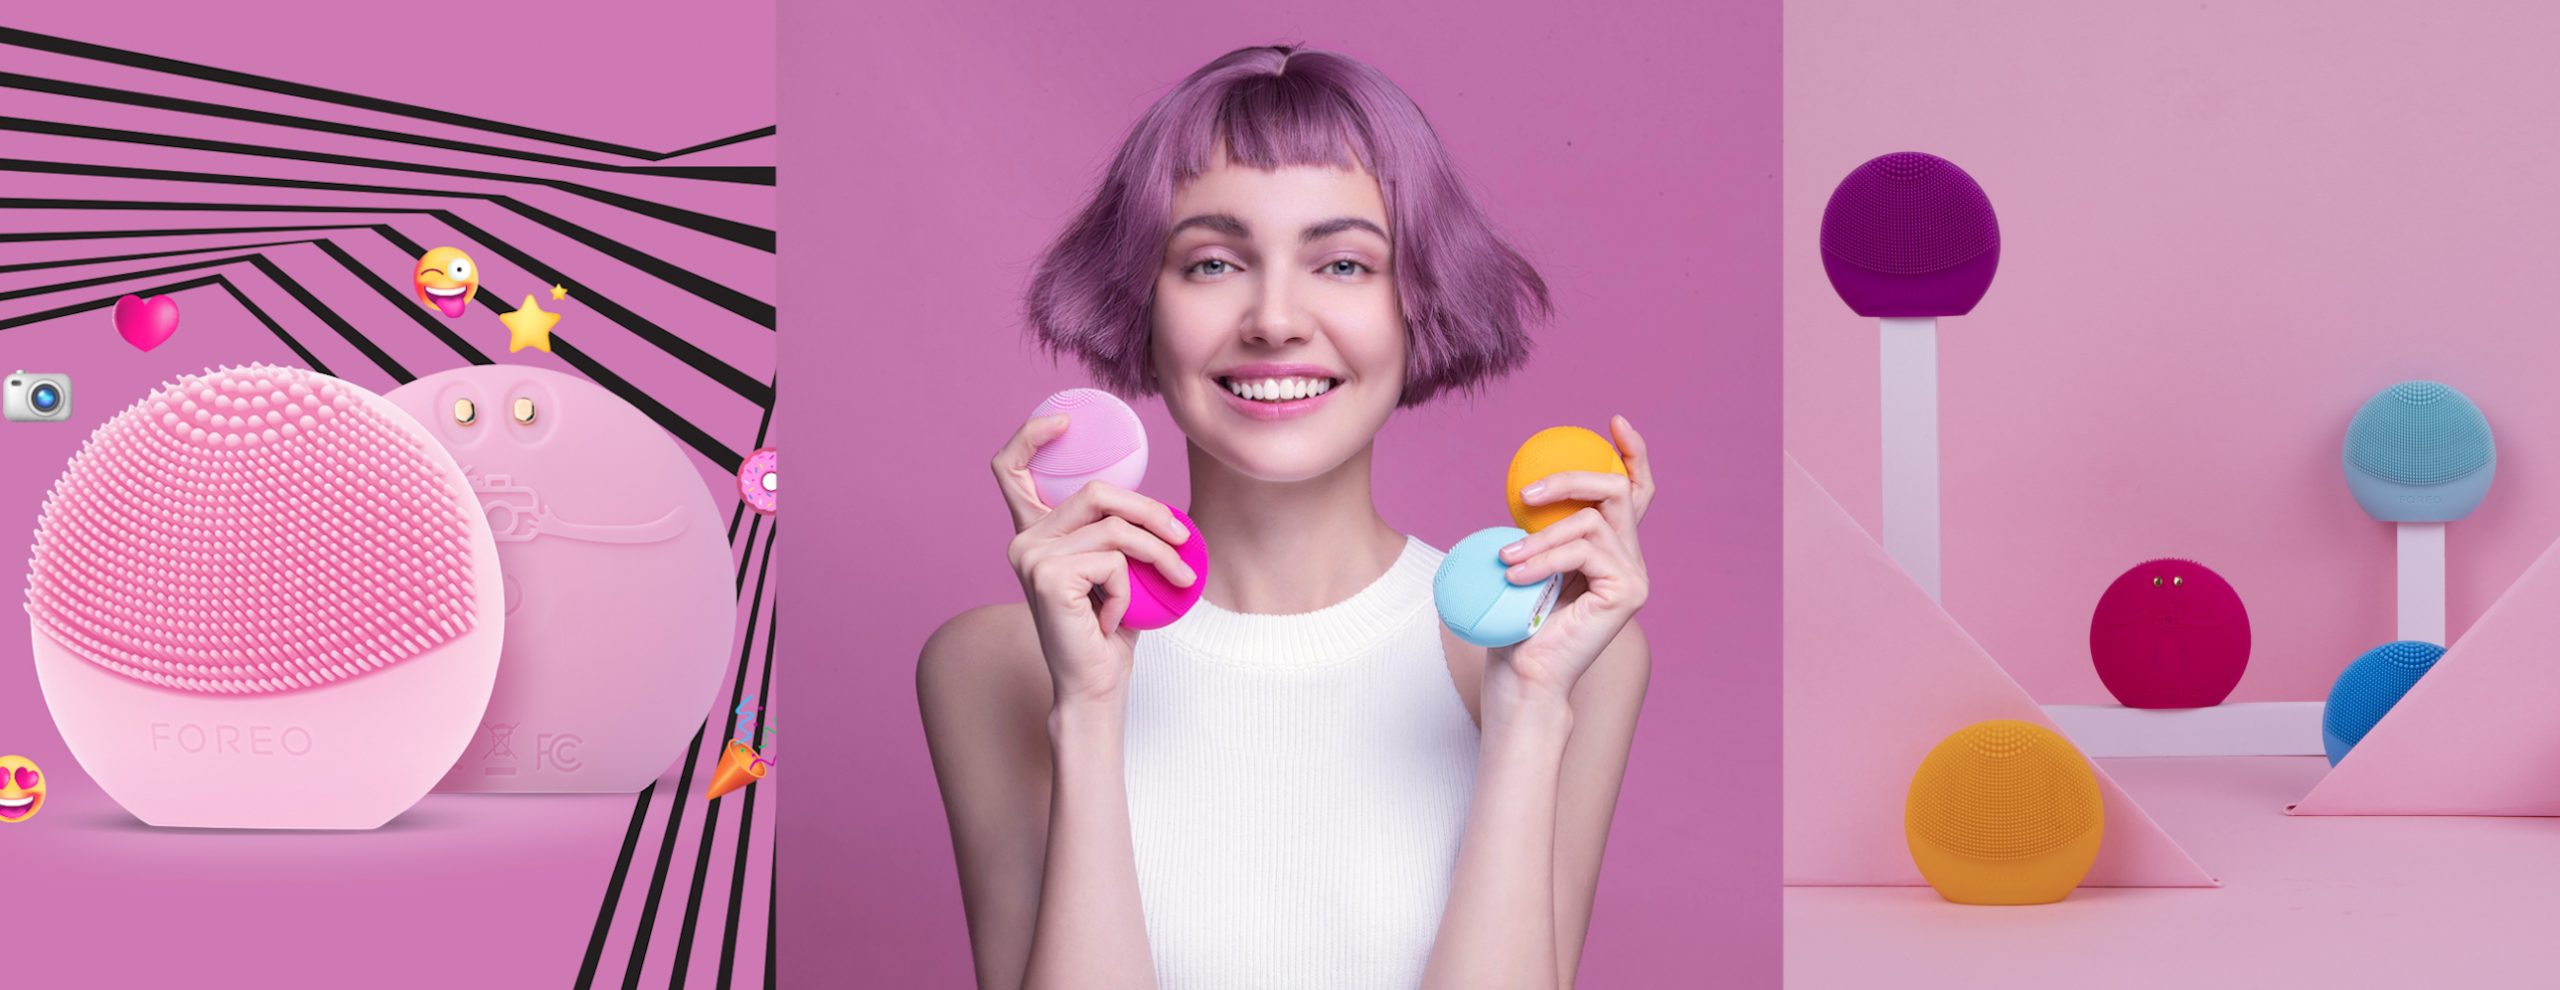 FOREO Has A New Smart Facial Cleansing Device Called The LUNA™ fofo